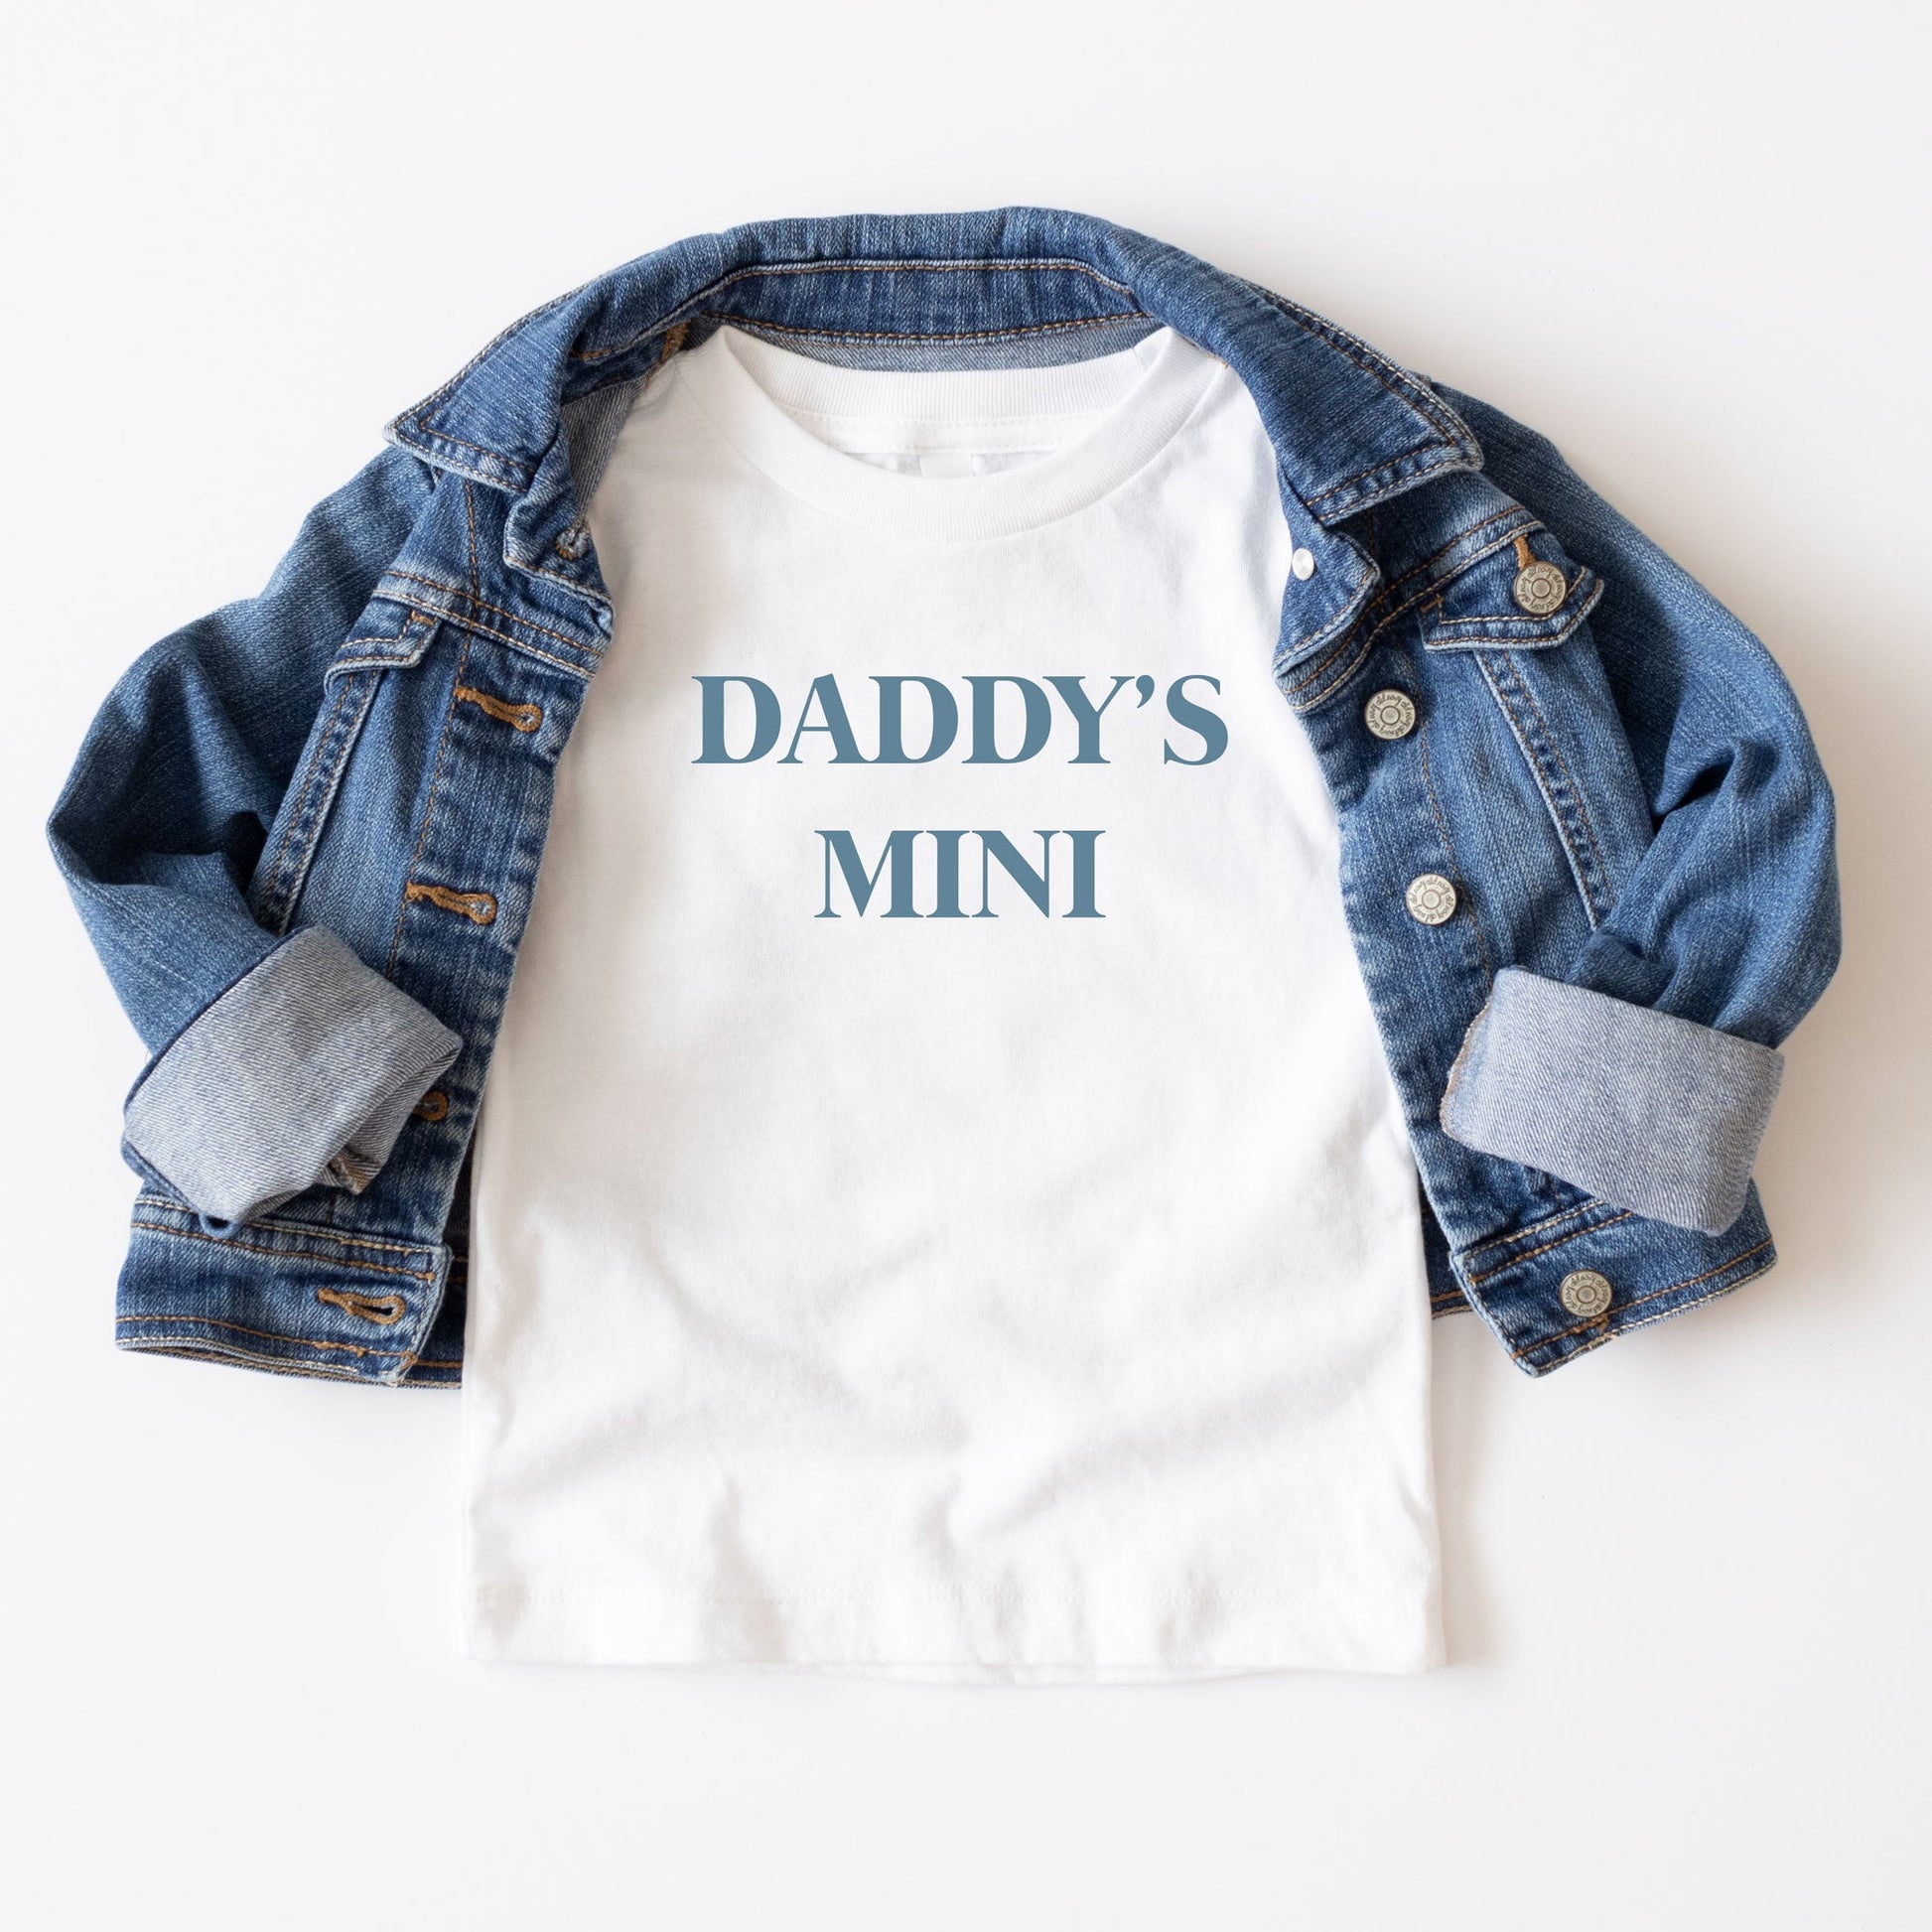 youth jean jacket and a white tee featuring a custom dtg printed design reading '"daddy's mini" across the chest 